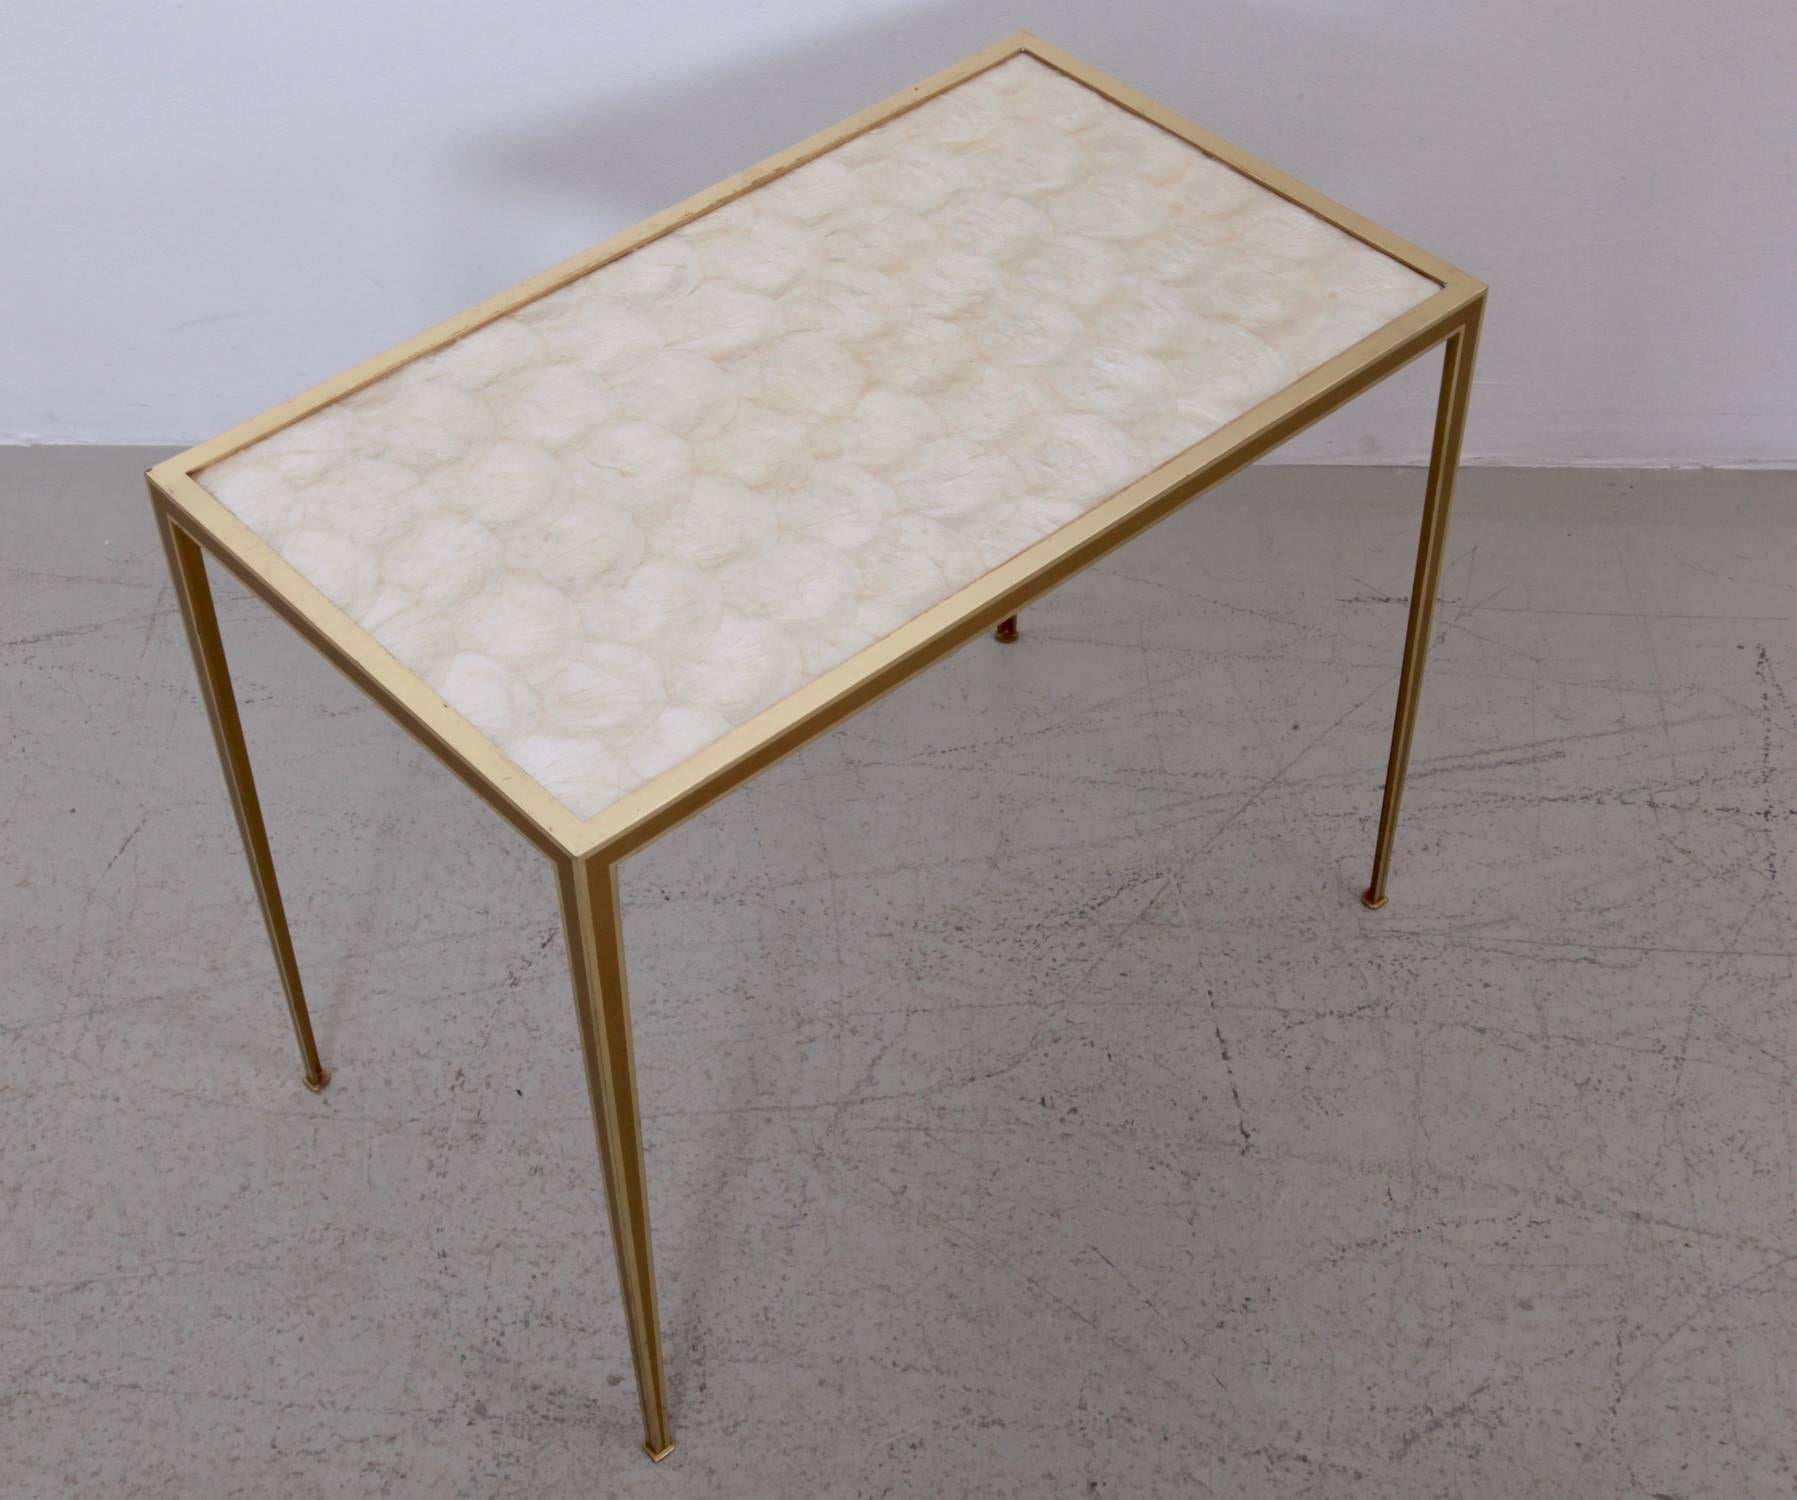 Rare mother-of-pearl side table by Vereinigte Werkstätten München in excellent condition. Solid brass frame polished on the edge and matte on the sides.